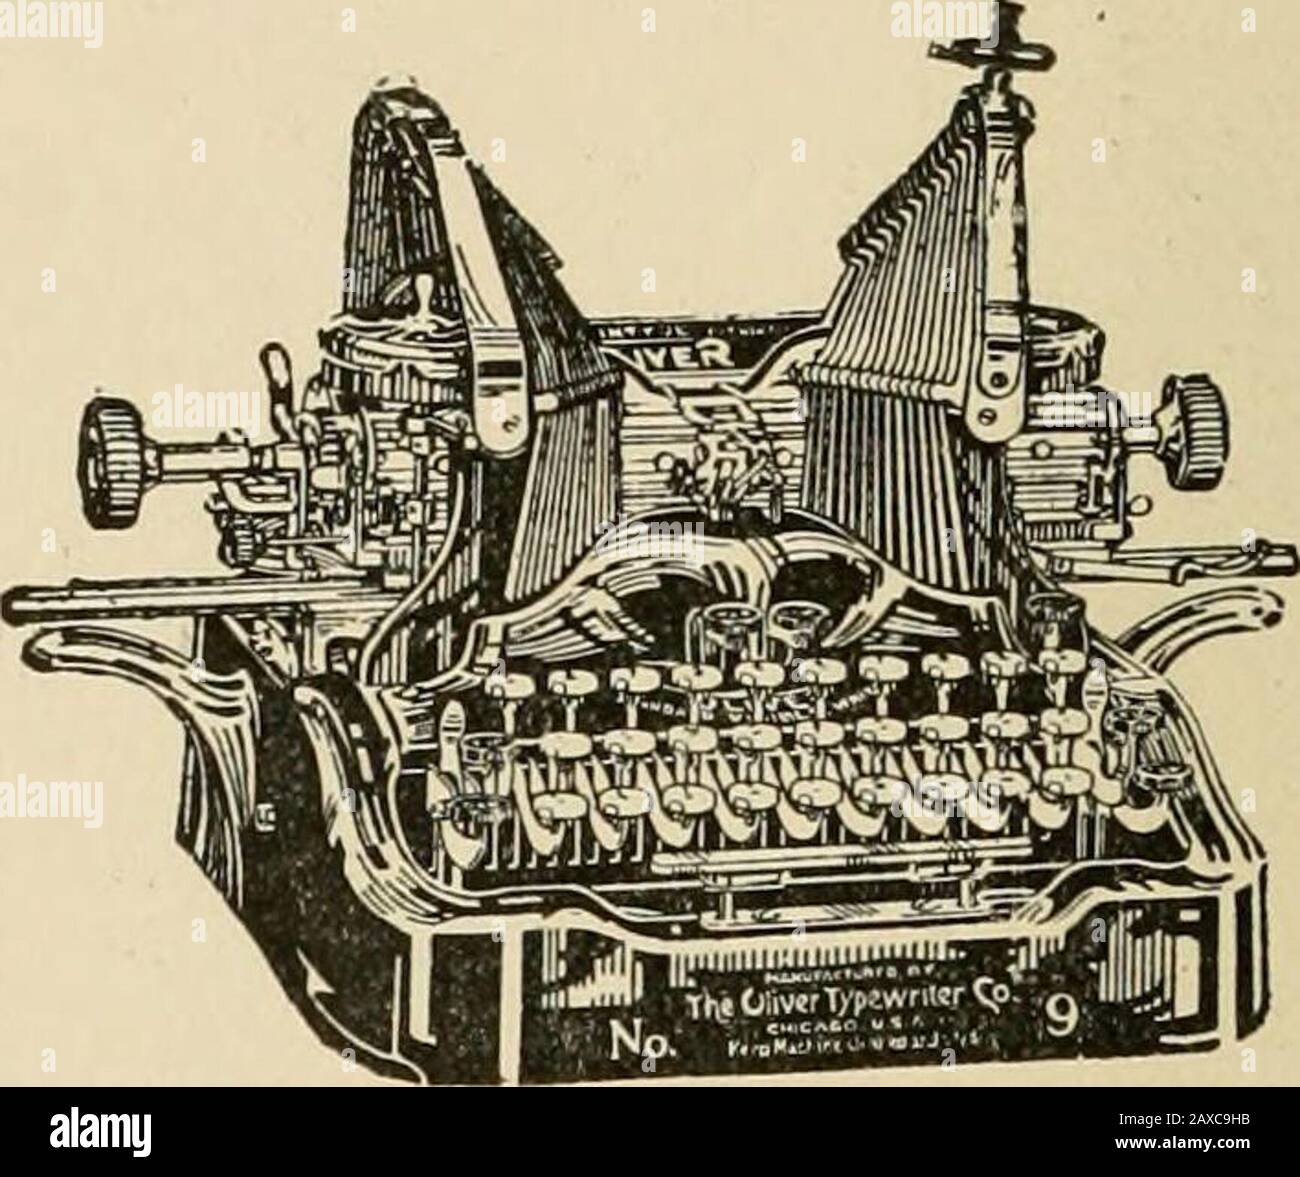 Gleanings in bee culture . Vol. XLIY MARCH 1, 1916 No. 5 A New Model Typewriter OLIVES/ The Standard Visible Writer M^^^ BUY IT NOW! Yes, the crowning typewriter triumph is here! It is just out—and comes years before experts expecied it.For makers have striven a Hfe-time to attain this ideal machine.And Ohver has won again, as we scored when we gave the ivorldits first visible writing. There is truly no other typewriter on earth like this newOliver 9. Think of touch so light that the tread of a jtittenwill run the keys!. Caution! Warning! This brilliant new Oliver comes atthe old-time price. I Stock Photo